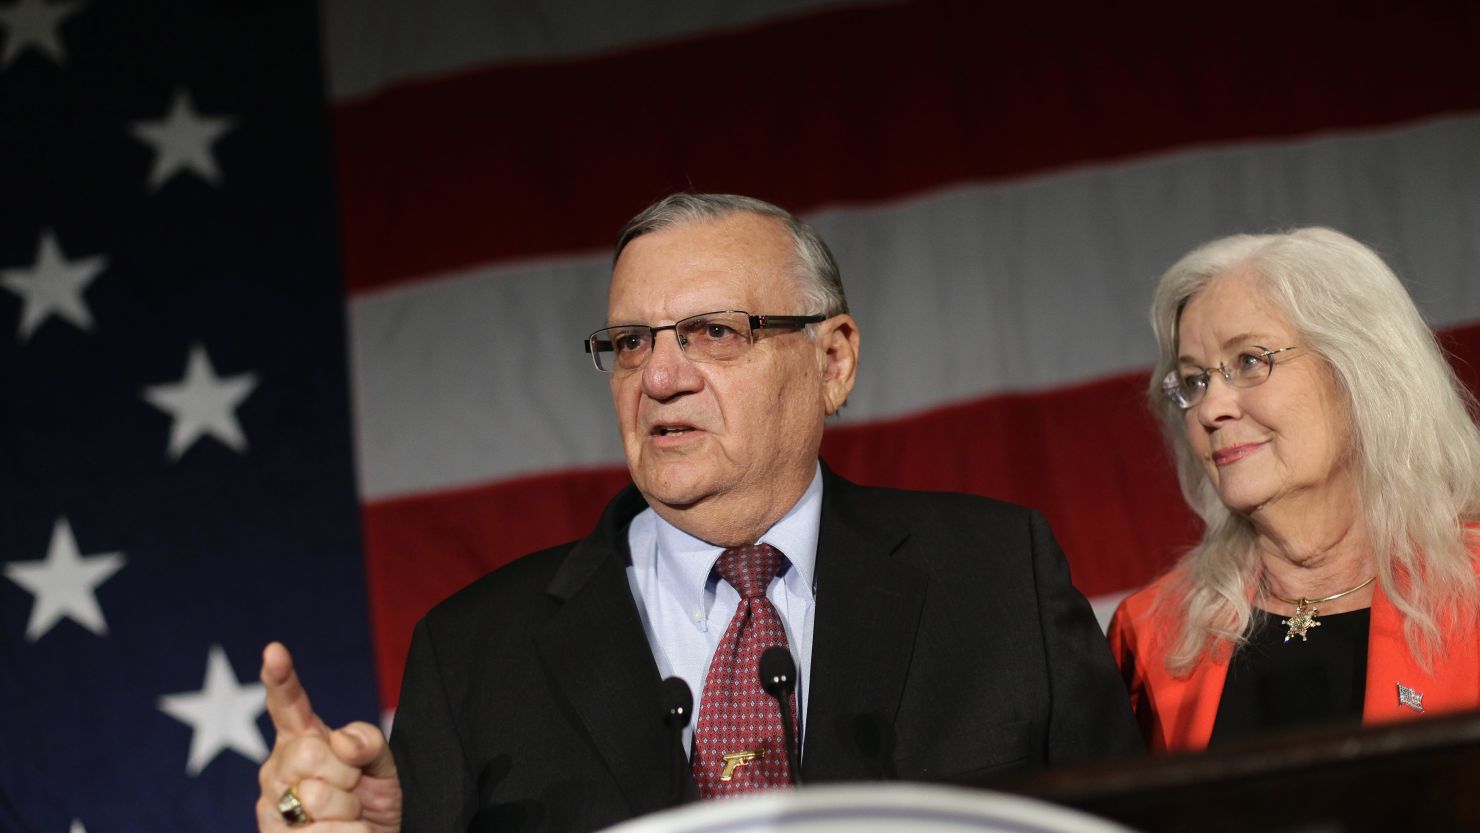 Then-Maricopa County Sheriff Joe Arpaio speaks next to his wife, Ava Arpaio, during a Republican Party election night event in Phoenix,  Arizona, November 6, 2012.